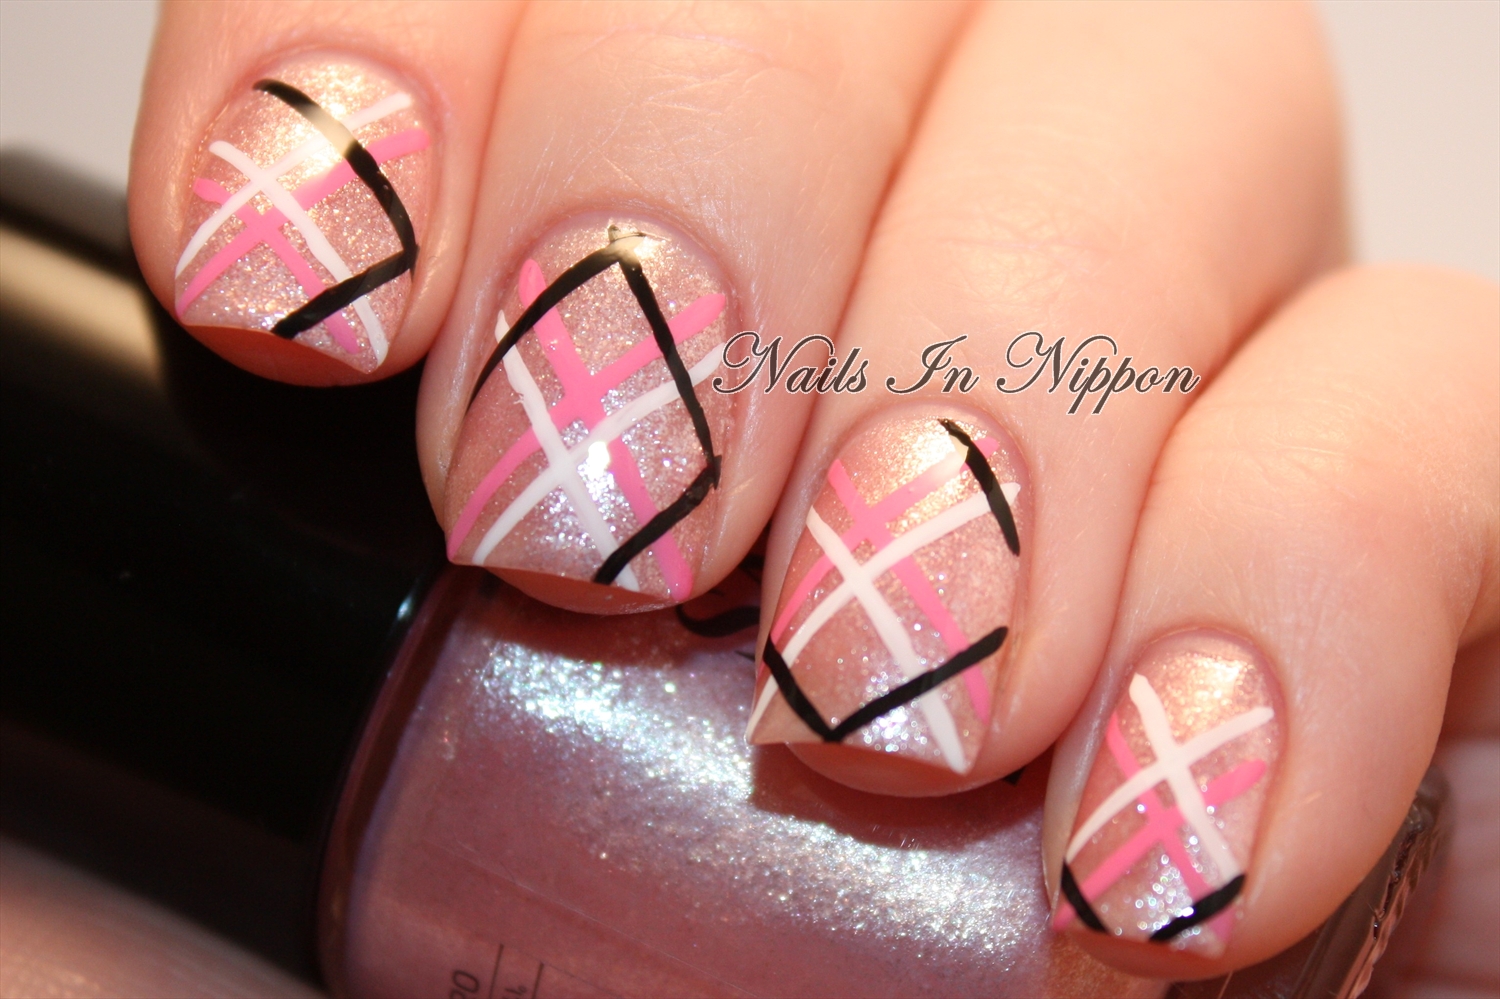 5. "Pink and Purple Halloween Nail Art" - wide 4